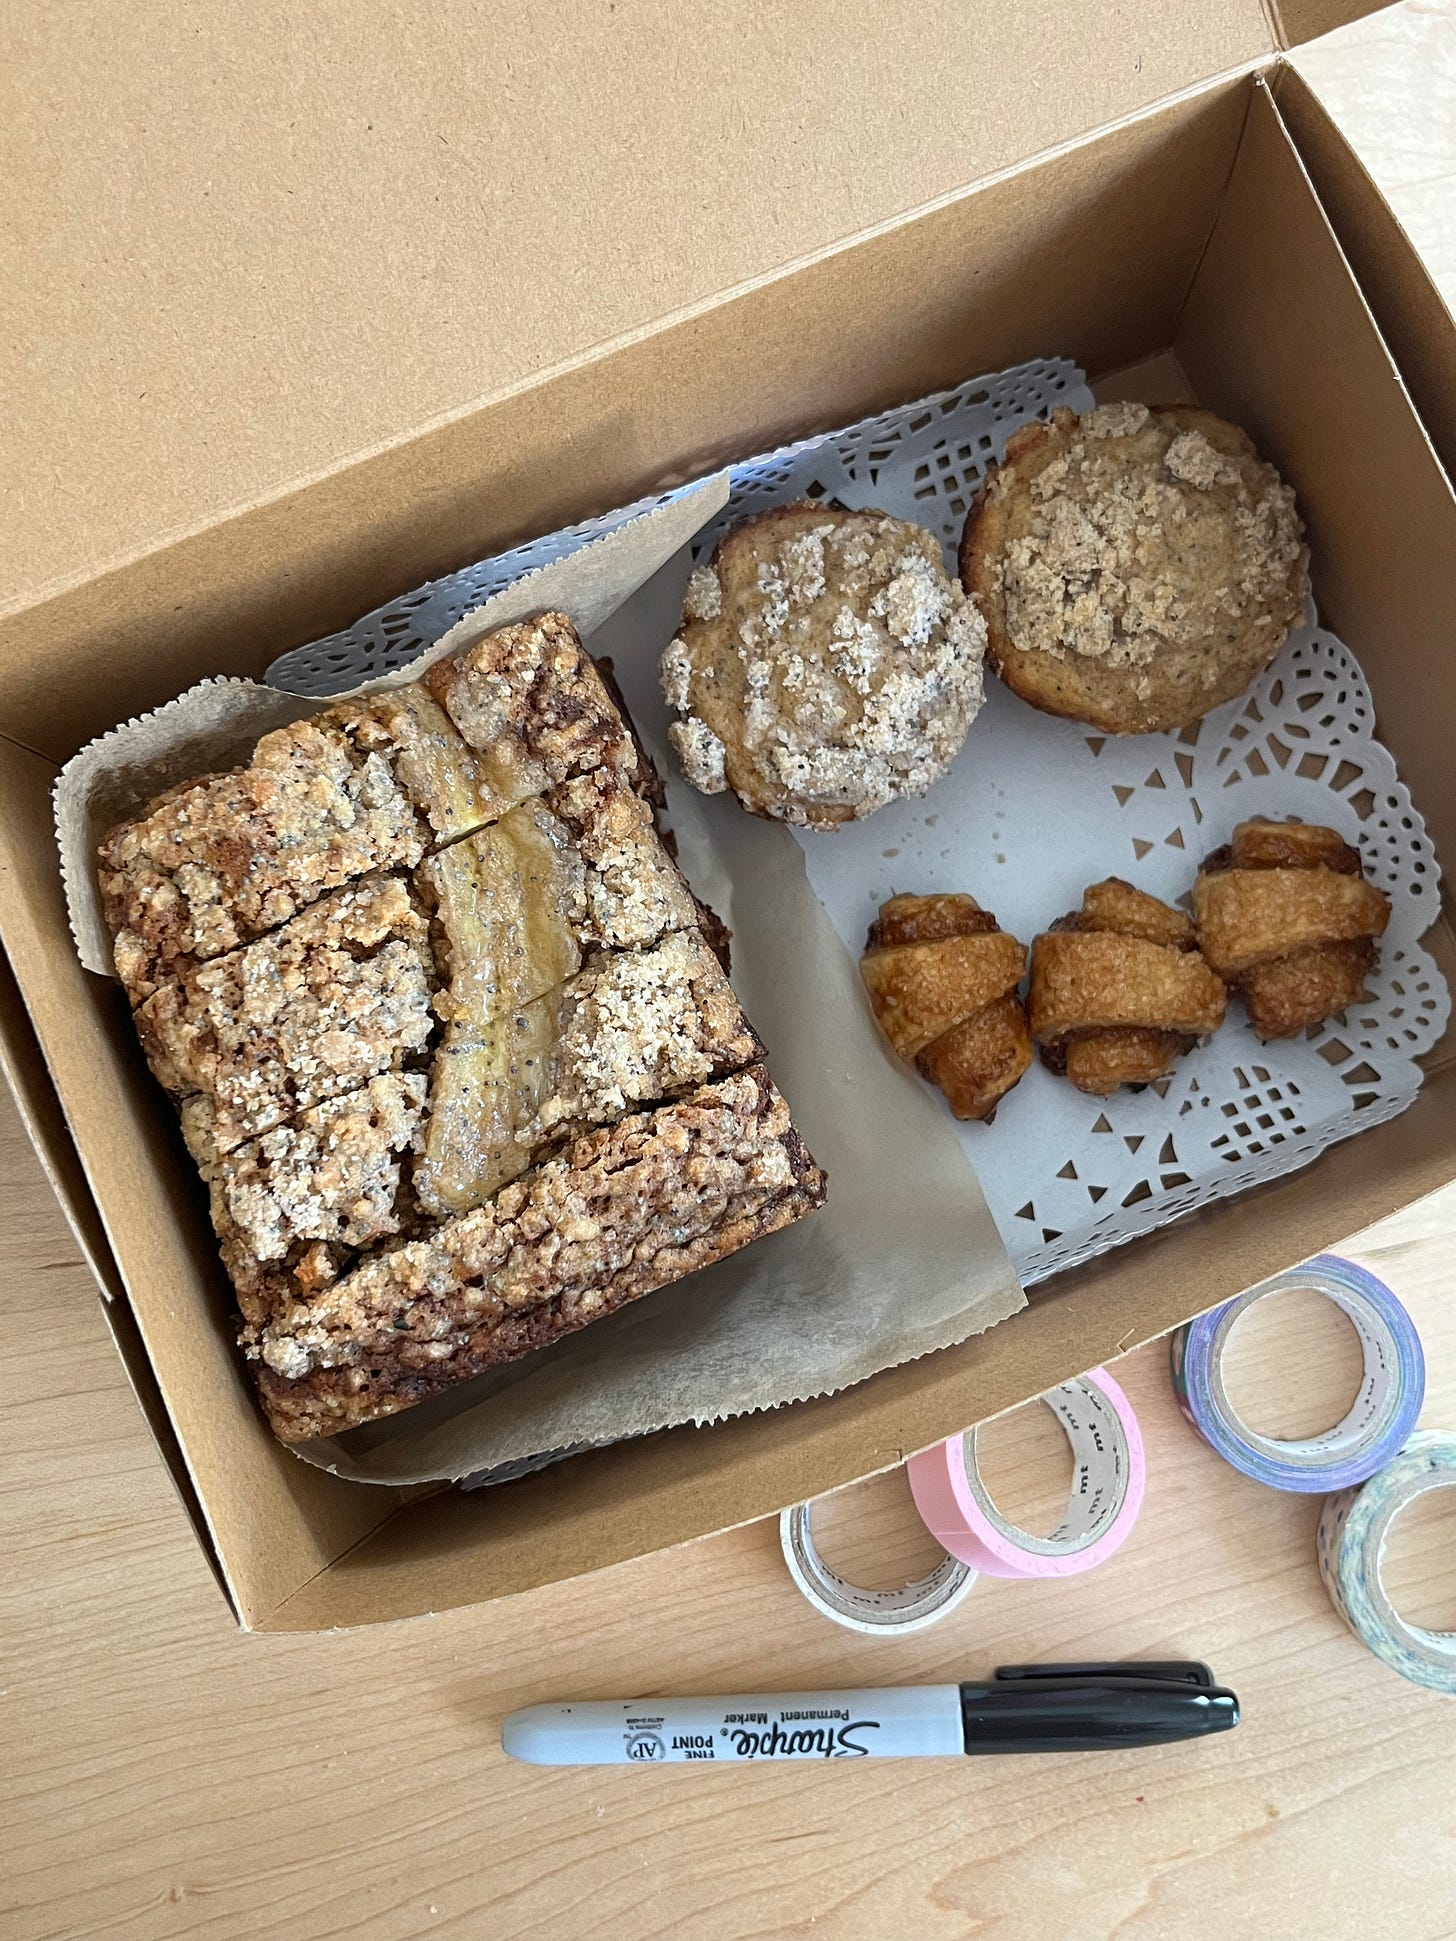 Overhead shot of a kraft box filled with banana bread, muffins, and rugelach.